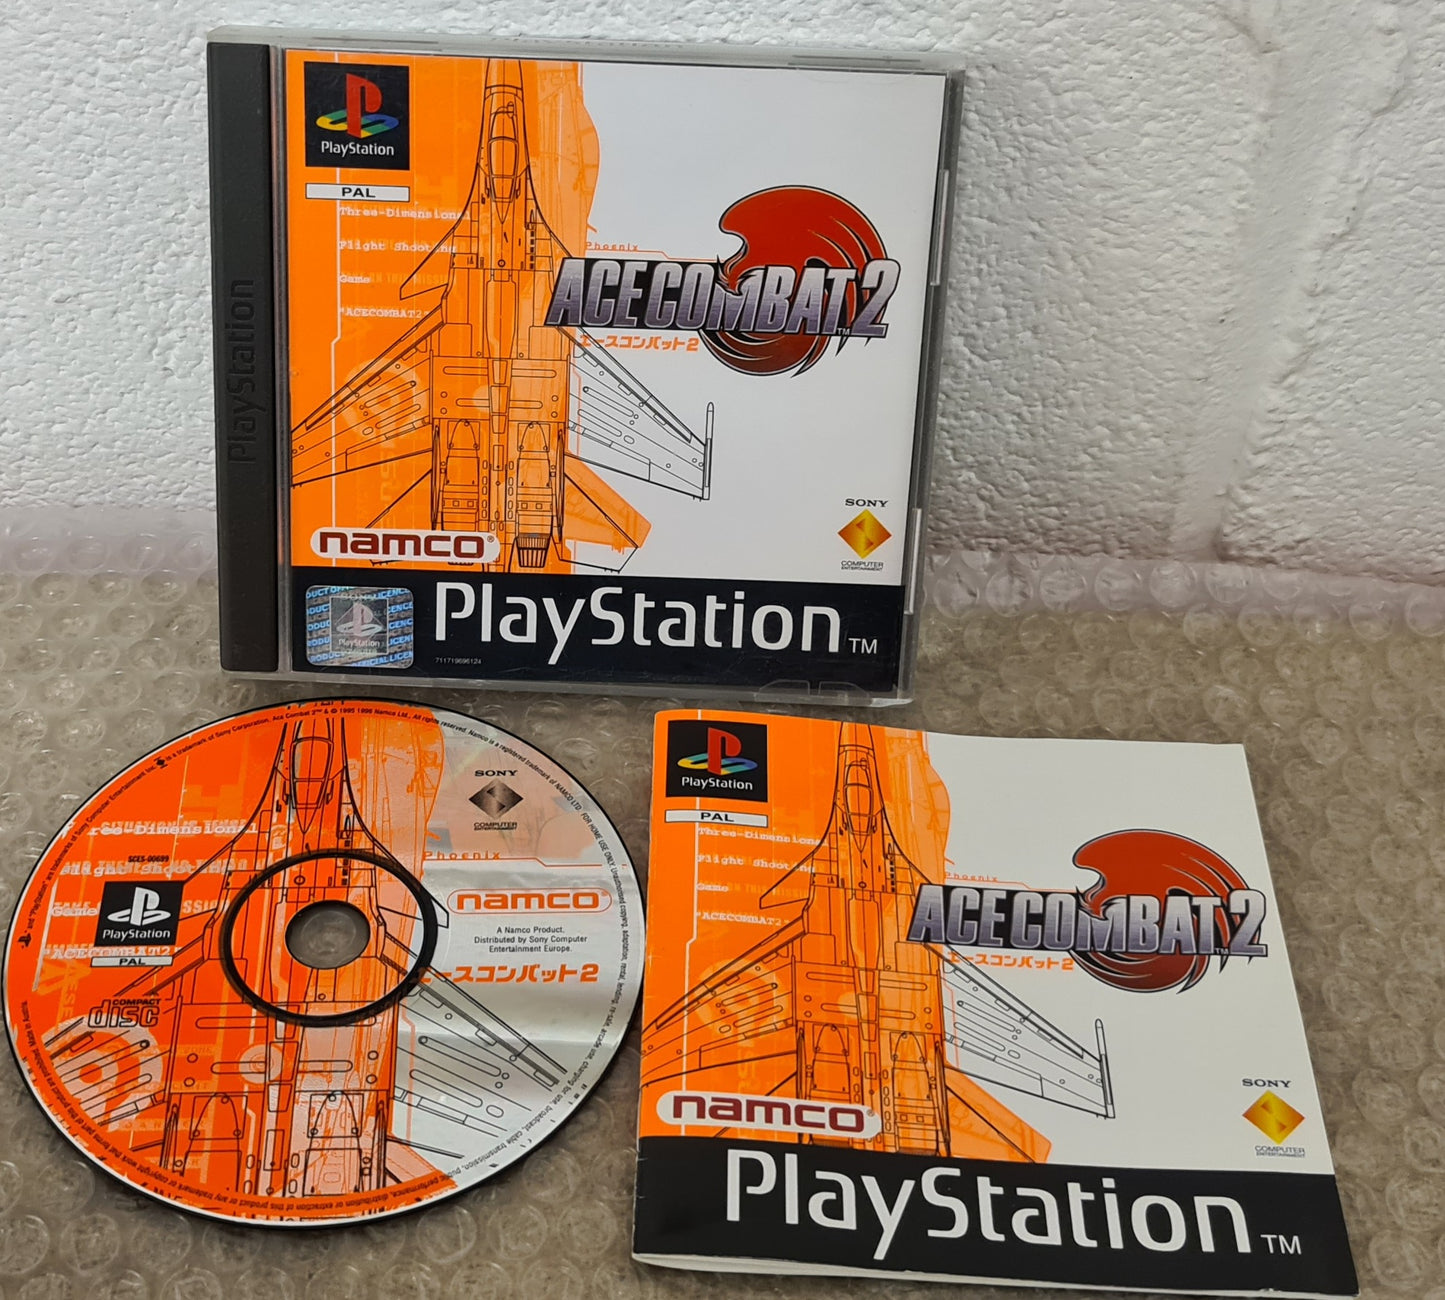 Ace Combat 2 Sony Playstation 1 (PS1) Game